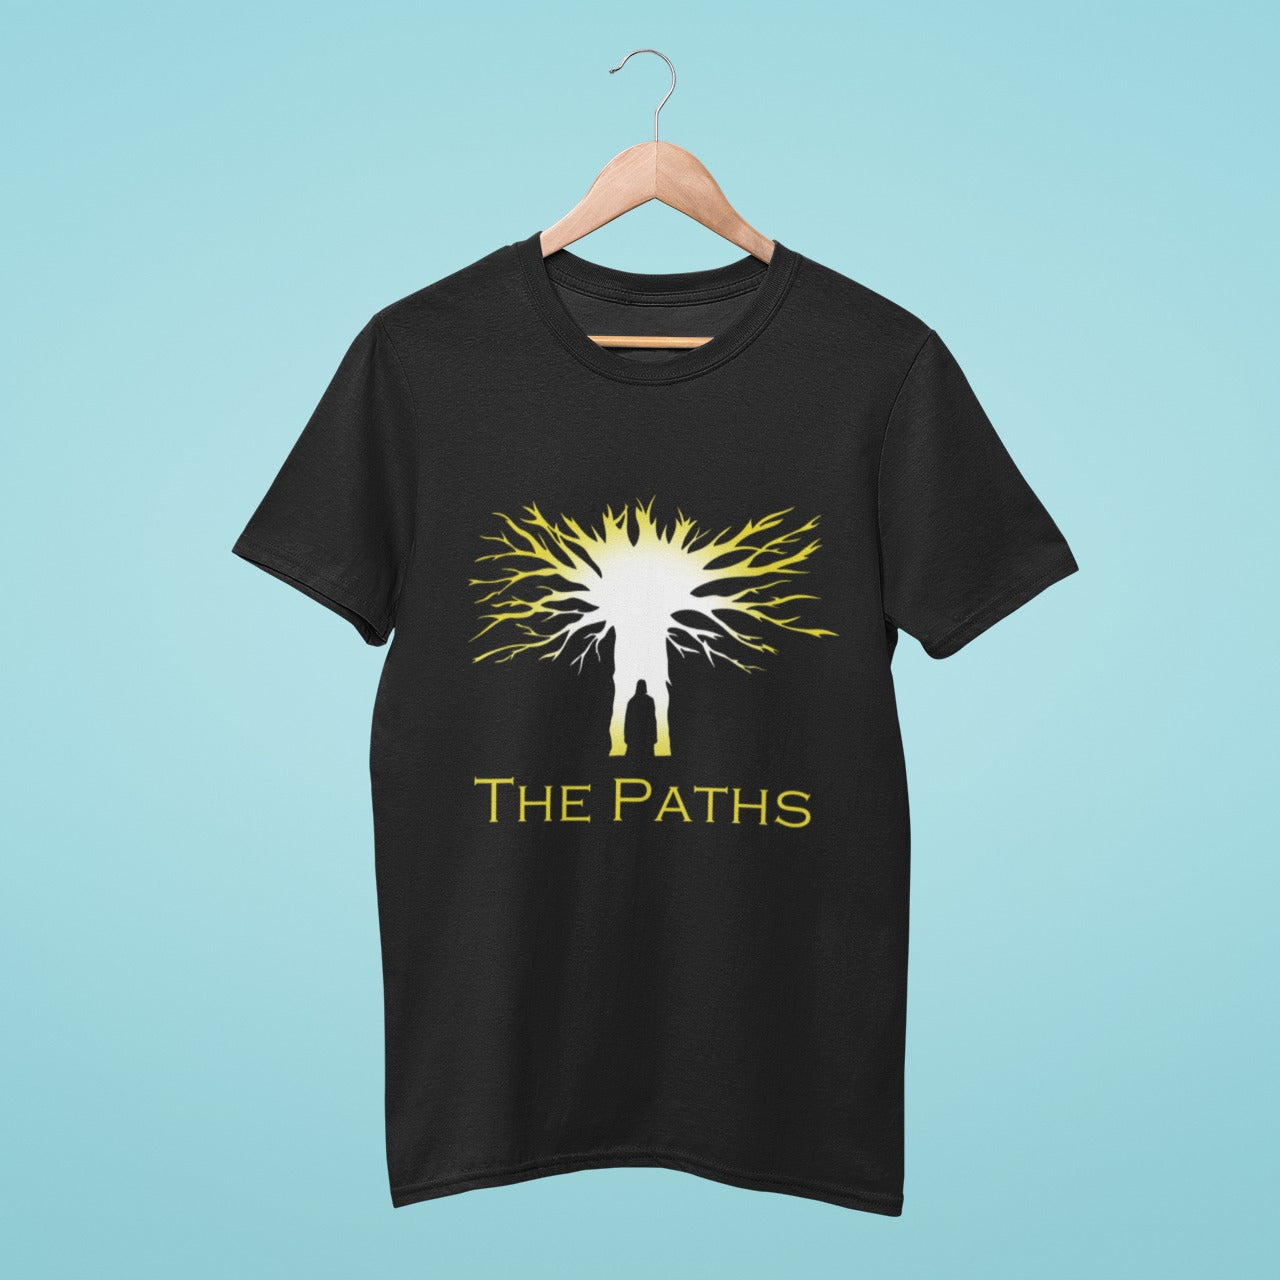 Upgrade your wardrobe with our black t-shirt featuring "The Paths" silhouette in golden from Attack on Titan anime! Made with high-quality materials for comfort and durability, this shirt is perfect for any fan of the series. Order now and show off your style!